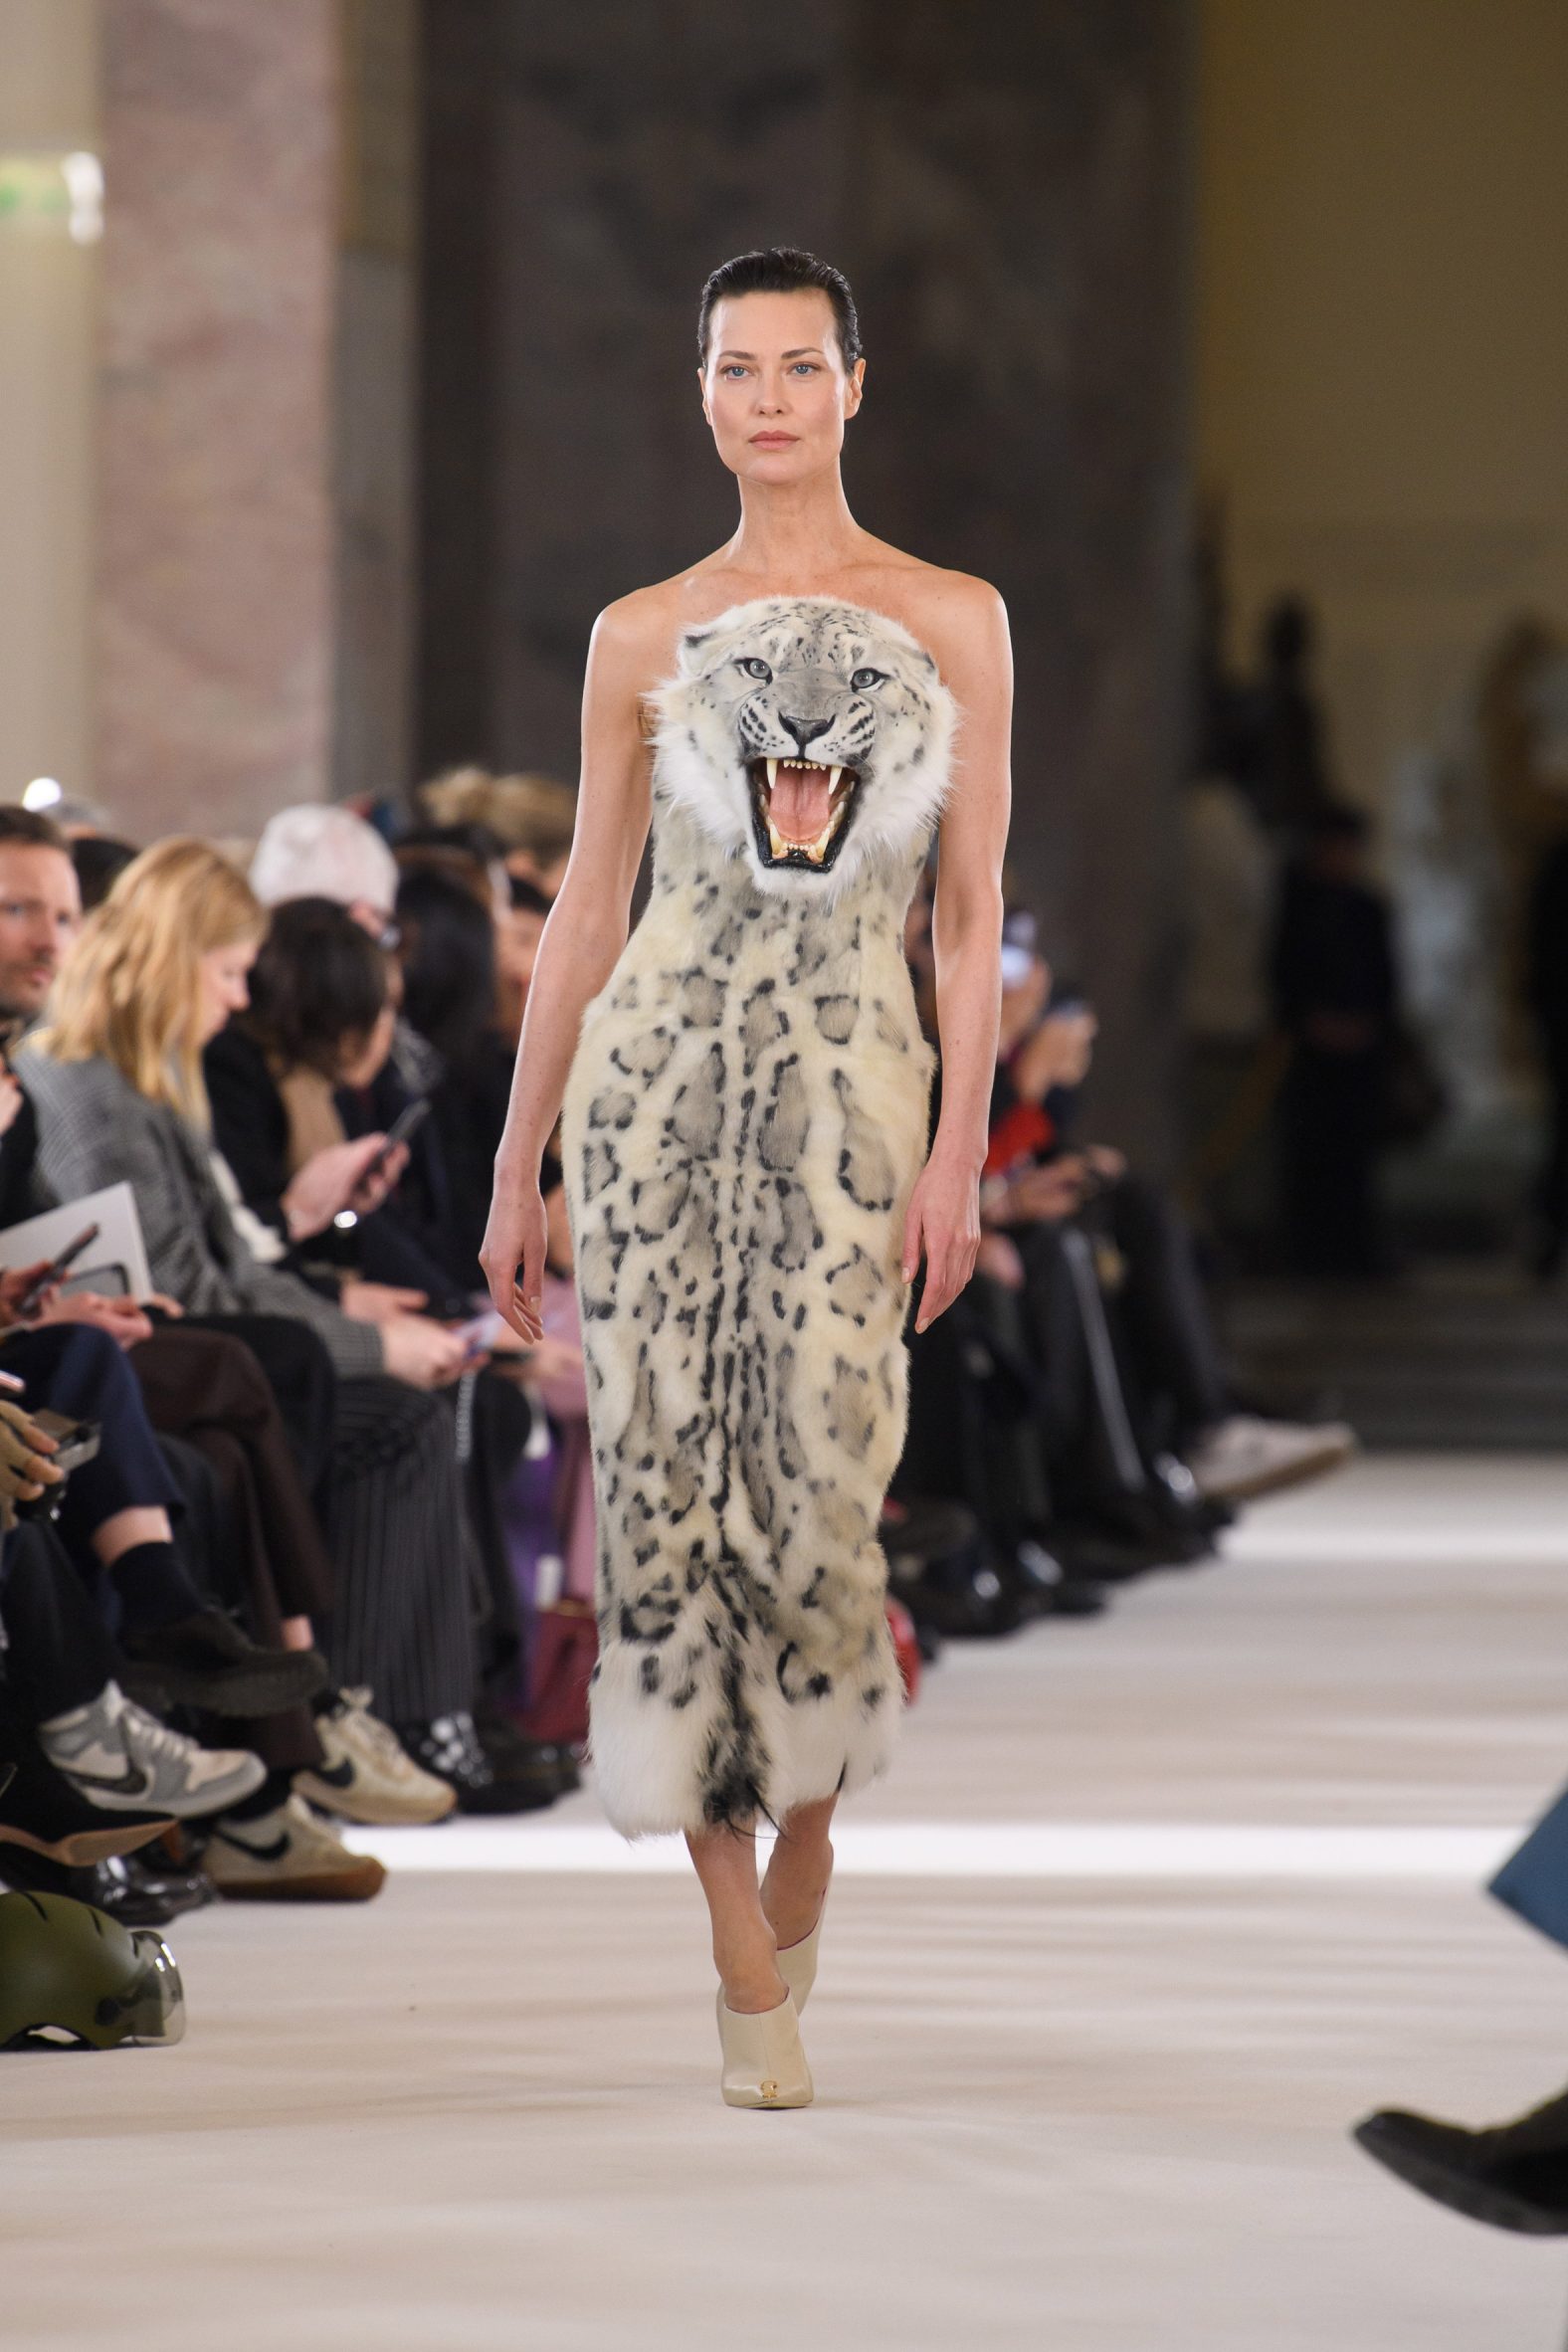 Wild animal heads decorate gowns at Schiaparelli couture show